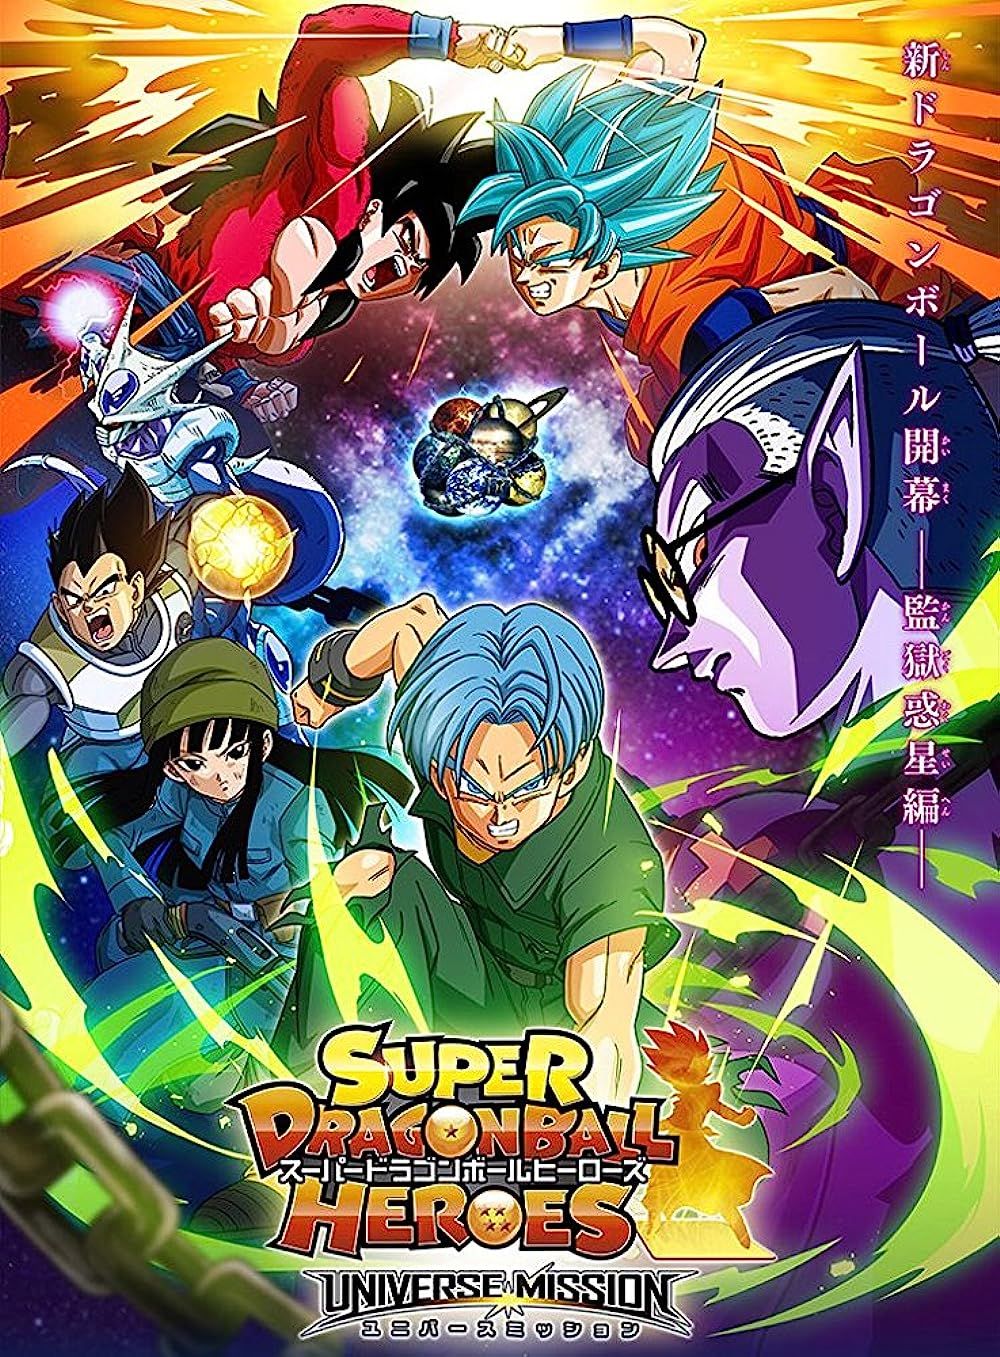 Poster of Super Dragon Ball Heroes with Trunks at the center and the Z-Fighters behind him